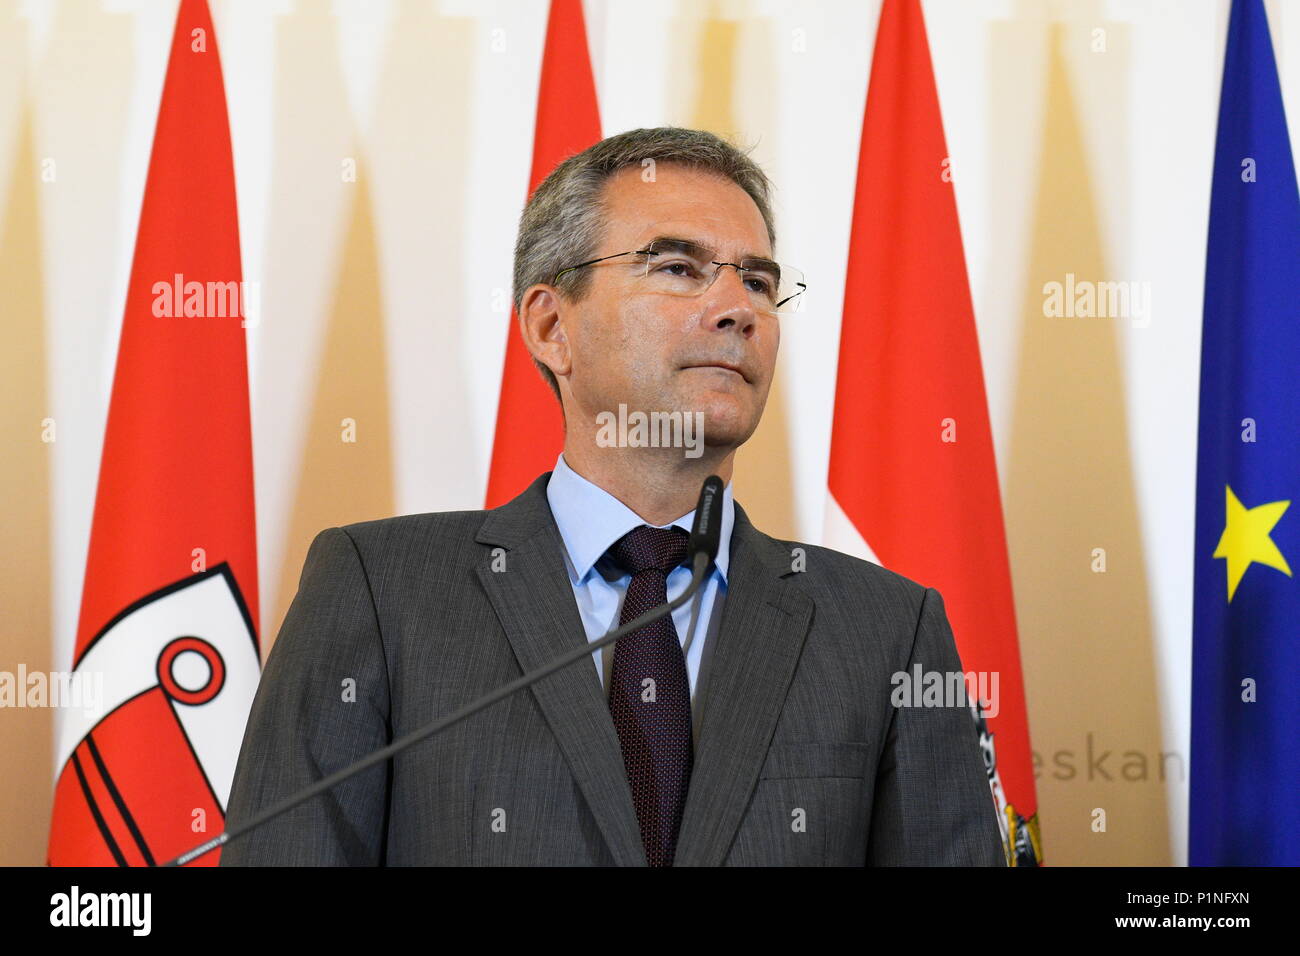 Vienna, Austria. June 13, 2018. Ministerial Council of the Austrian Federal Government in the Federal Chancellery in Vienna. Picture shows Minister of Finance of the Republic of Austria, Hartwig Löger.     Credit: Franz Perc / Alamy Live News Stock Photo